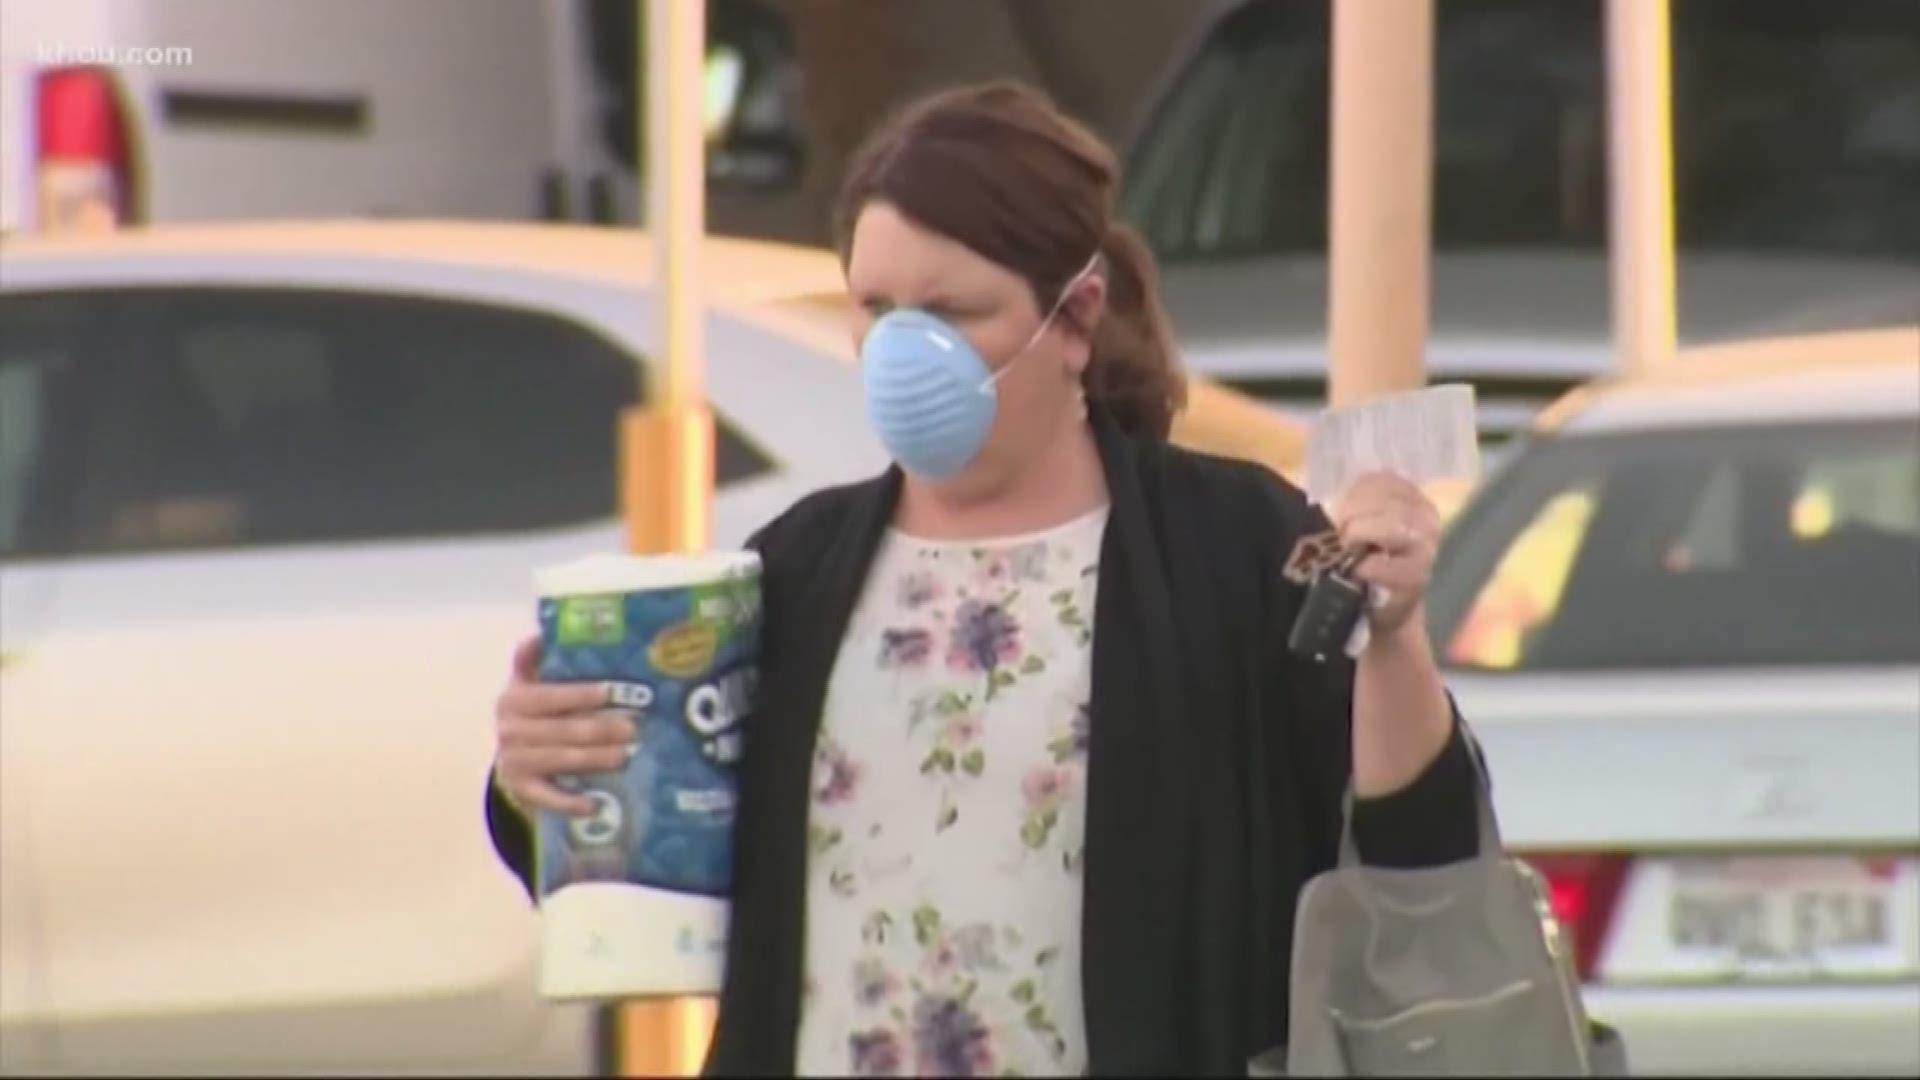 The CDC is now recommending people wear cloth face masks when they go out of their home. But there are some dos and don’ts when you do this.